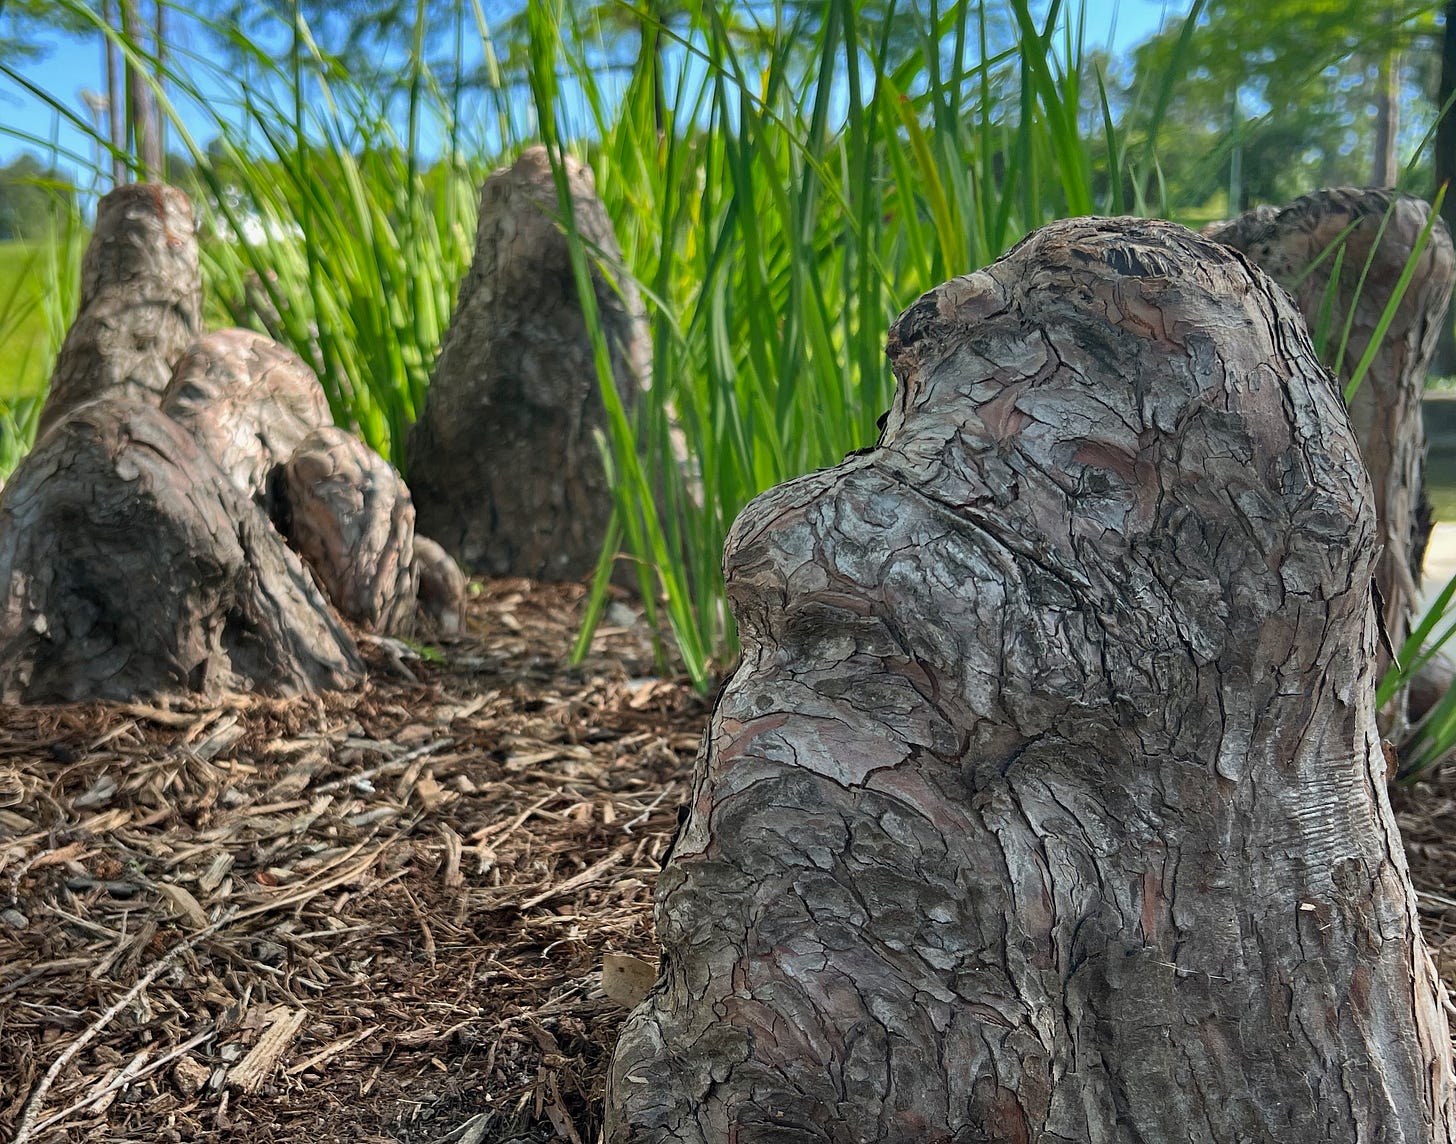 A close-up photo of cypress tree roots, called knees; they look like creatures coming from the earth surrounded by pine needles